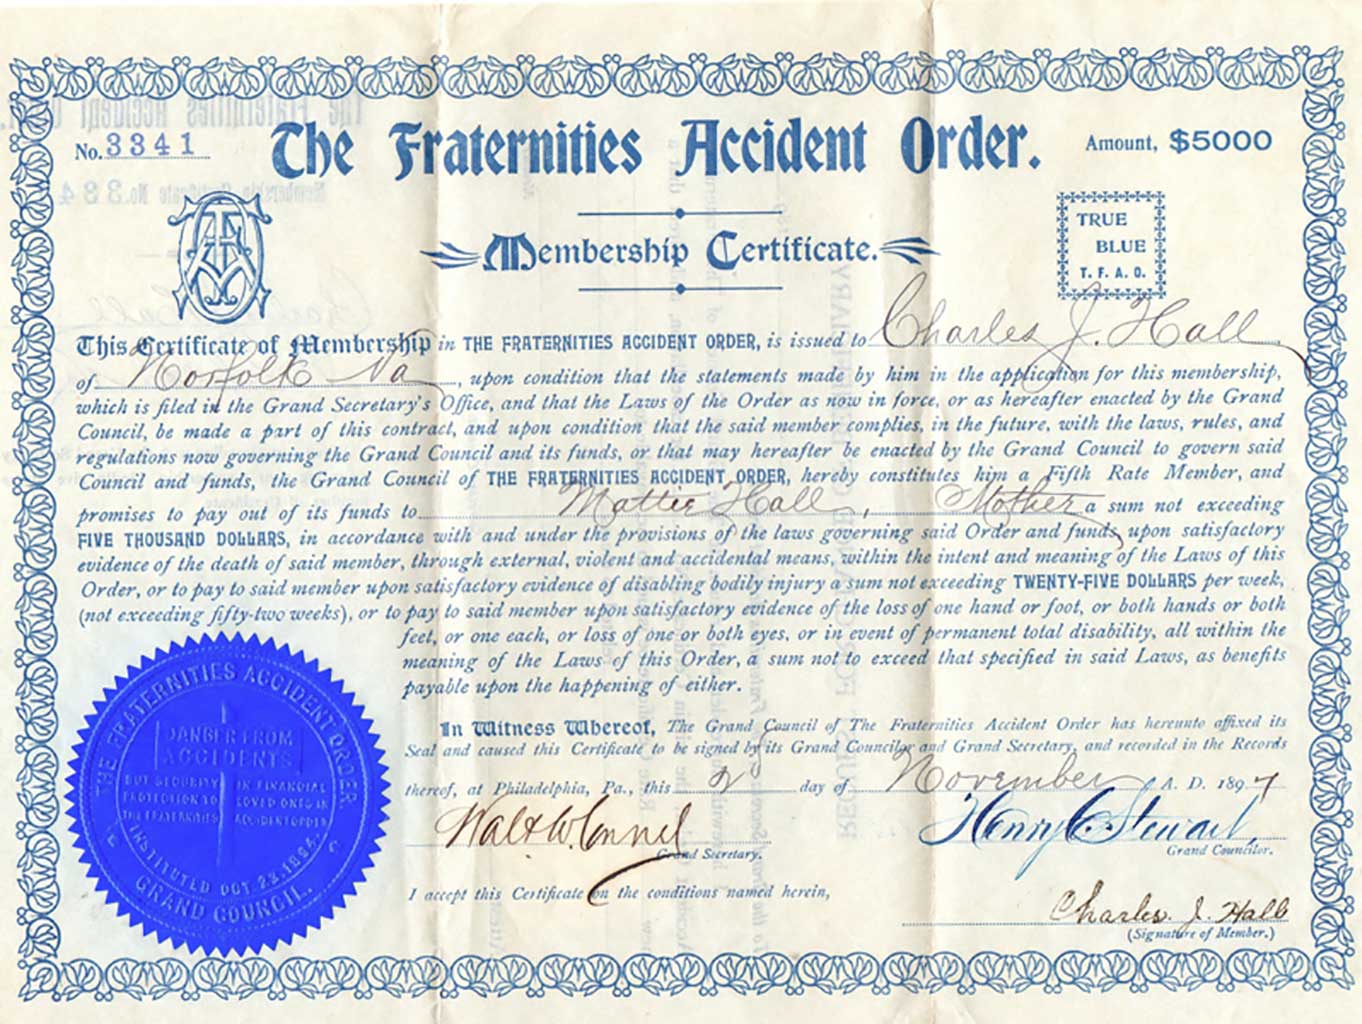 accident-policy-in-1897-img497